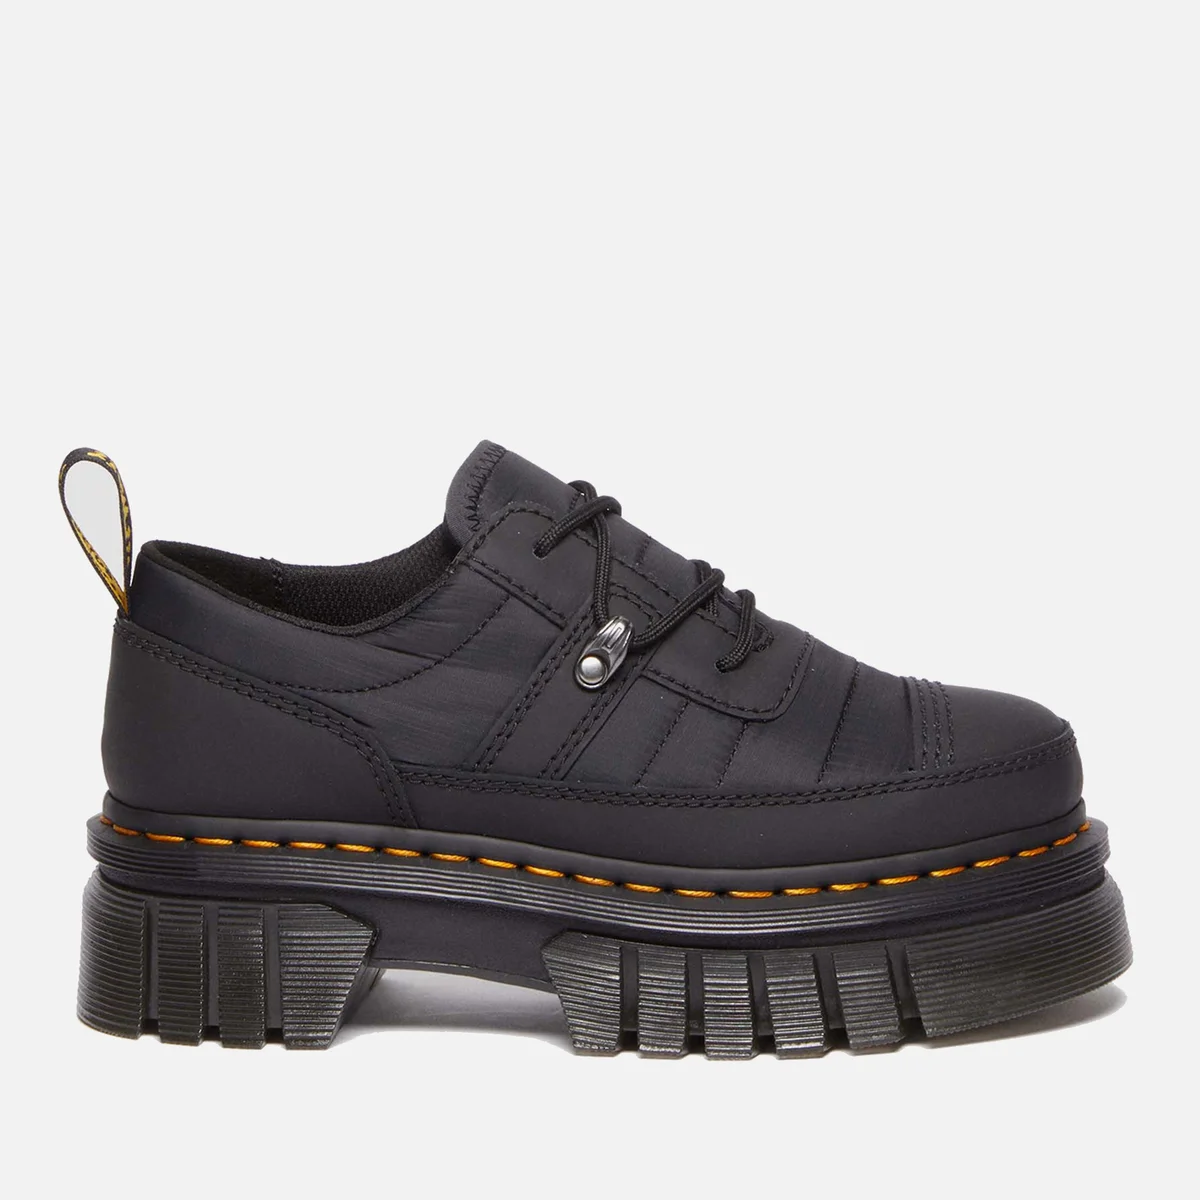 Dr. Martens Women's Audrick Quilted Nylon 3-Eye Shoes Image 1